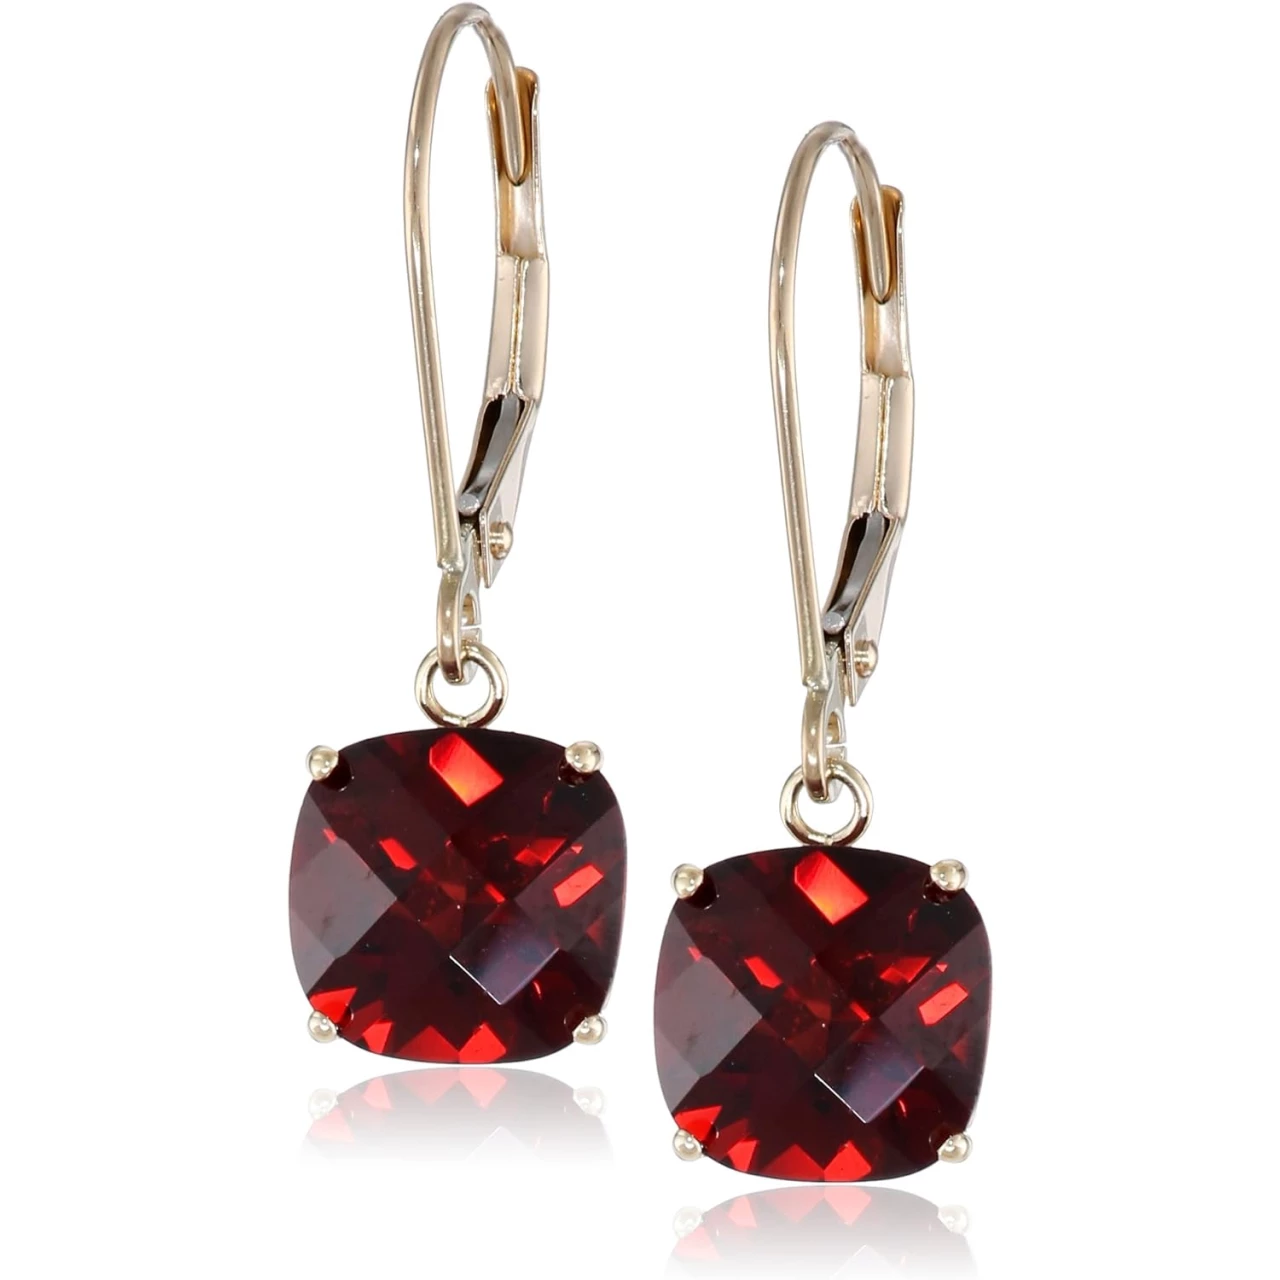 Amazon Collection 10k Gold Cushion Cut Gemstone Dangle Earrings for Women with Leverbacks